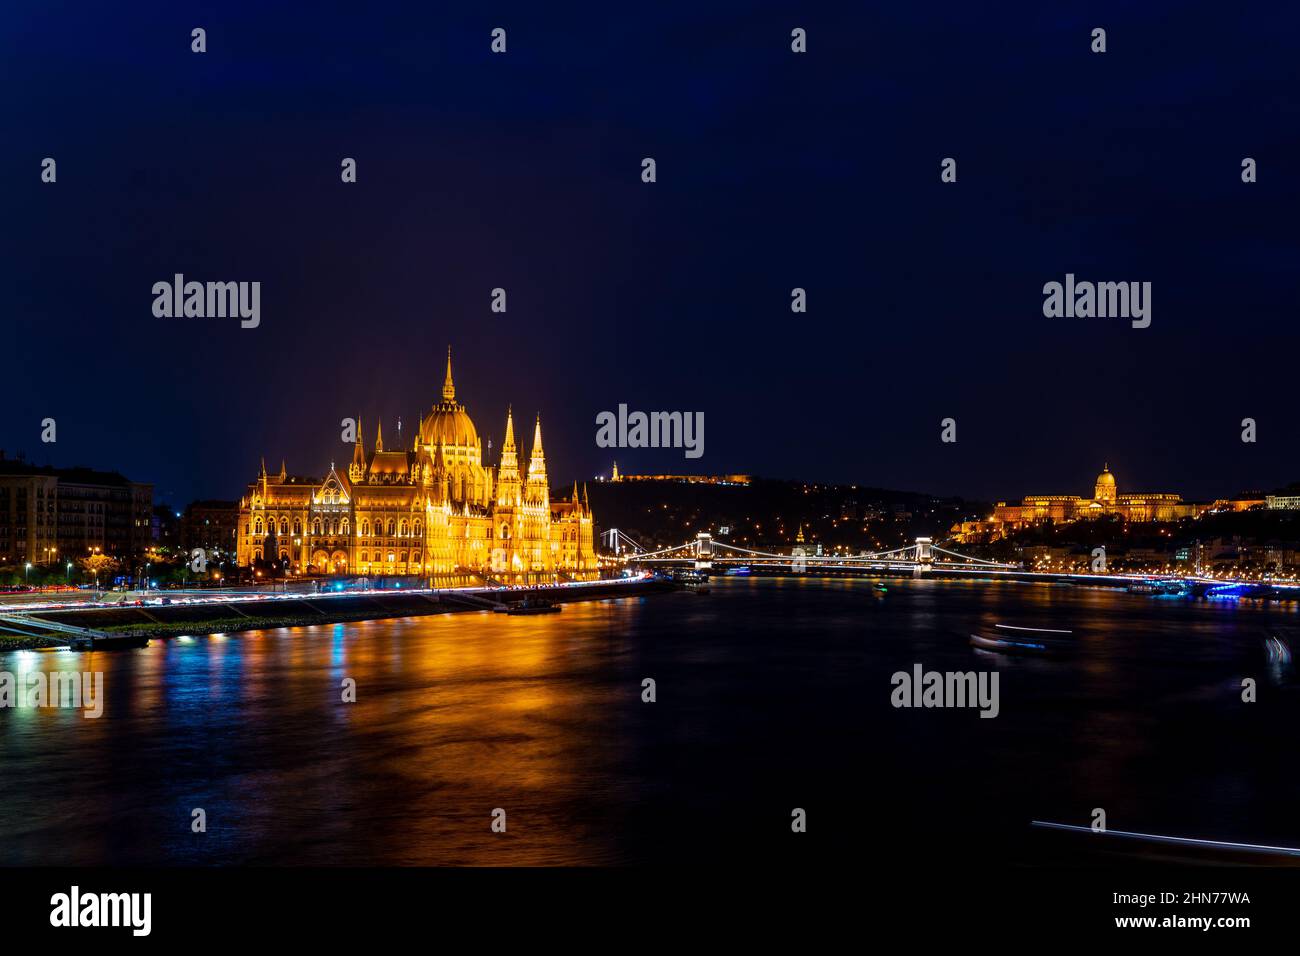 Wonderful mesmerizing view of the city at night illuminated by lights on the danube river. Wonderful architecture at night. Beautiful landscape on the Stock Photo